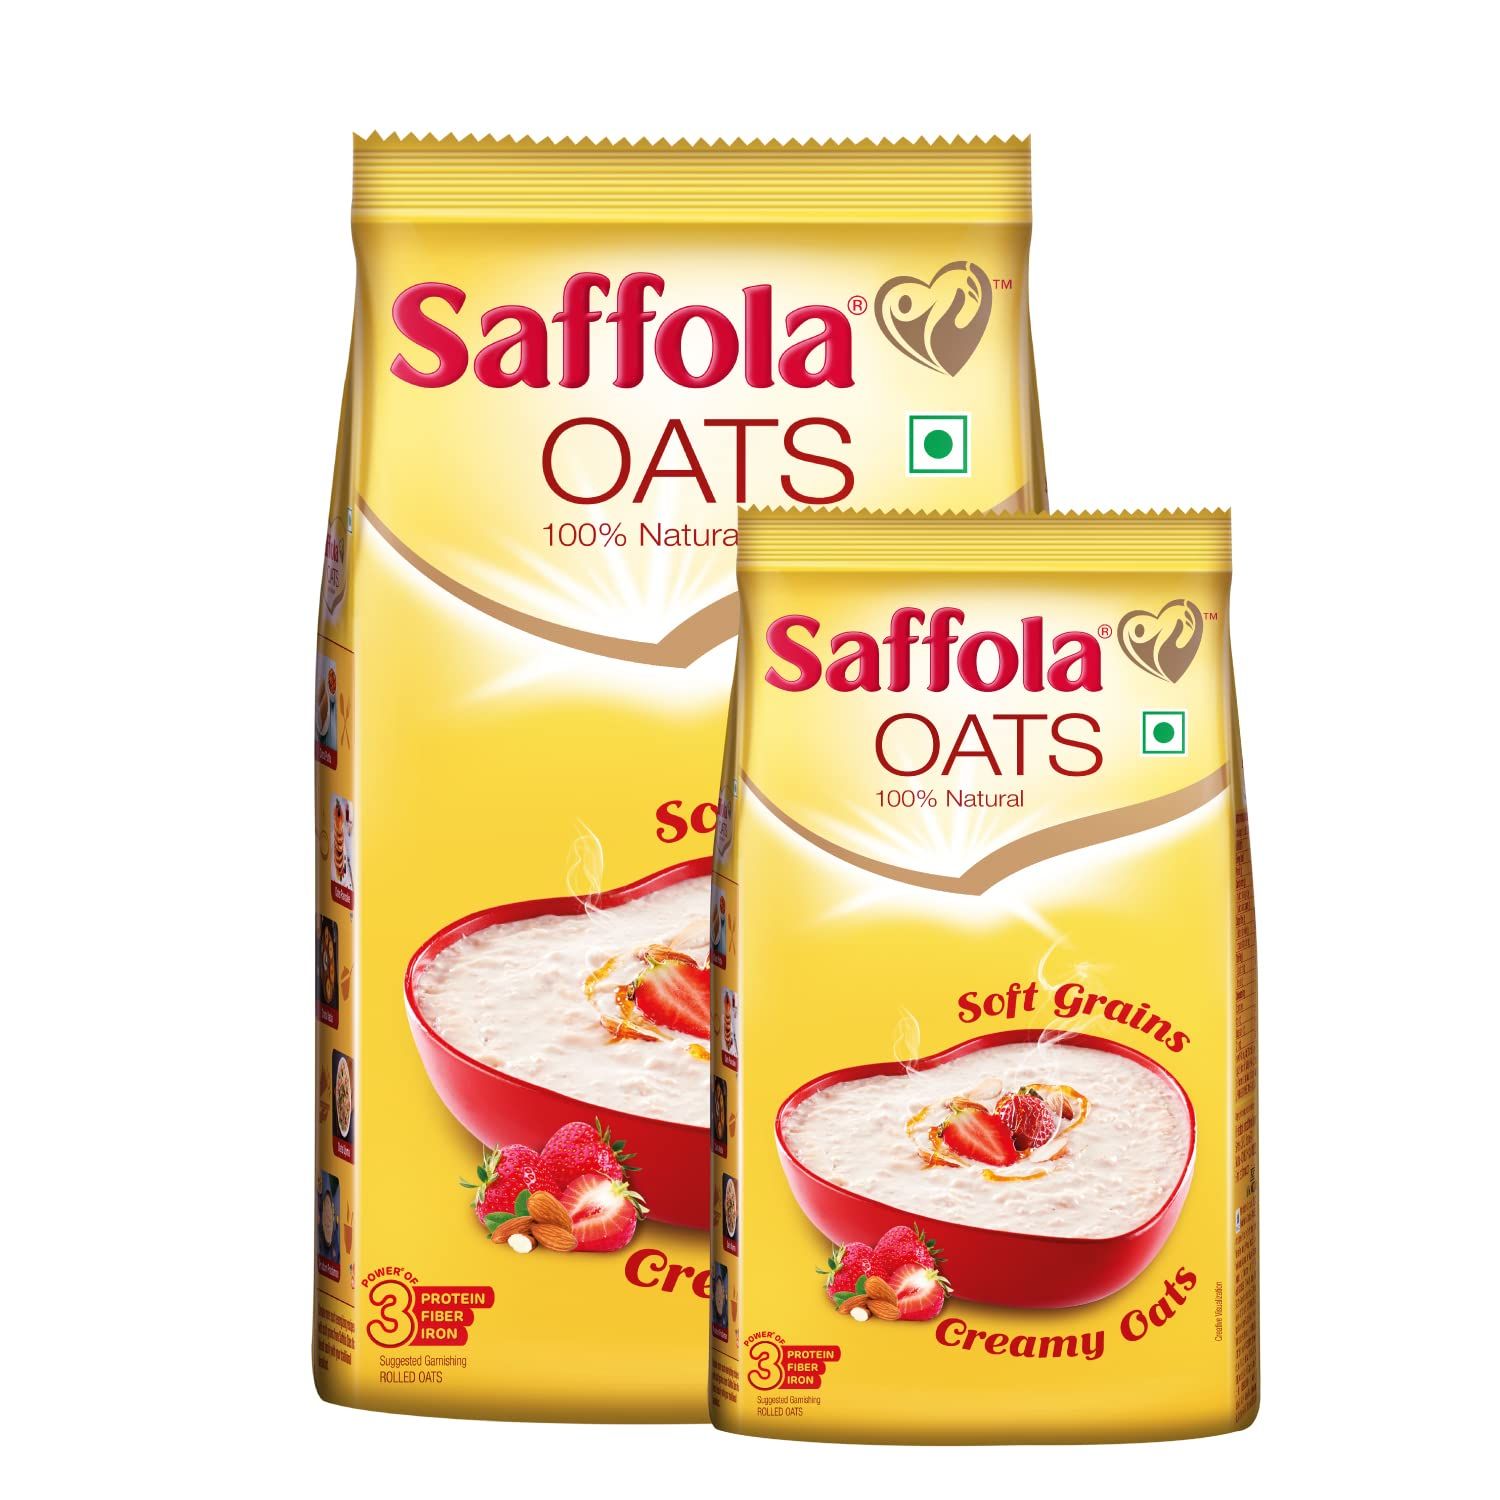 Saffola Rolled Oats Image